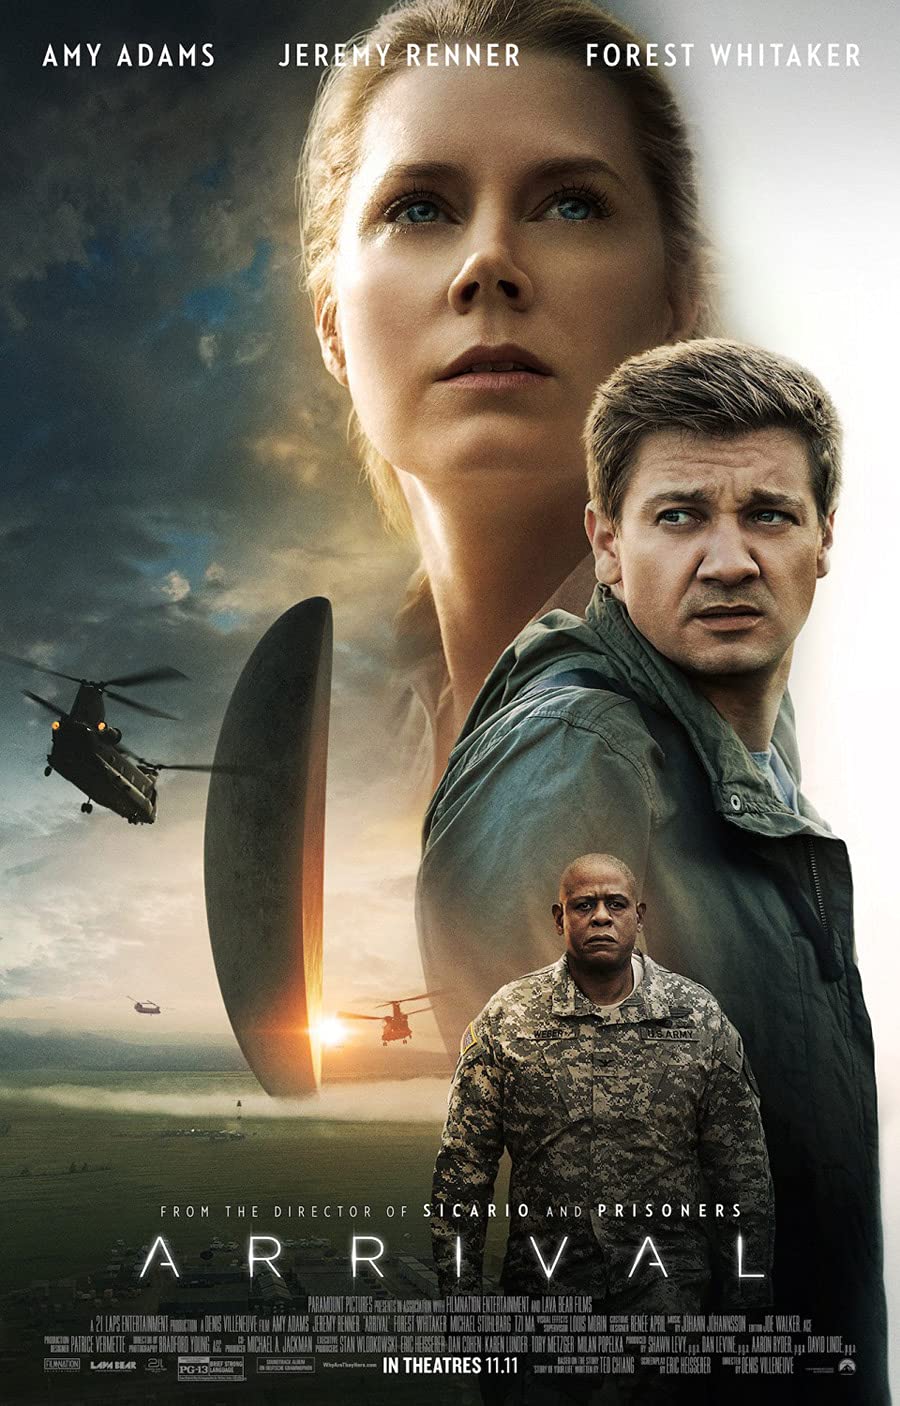 Graphic image of the movie poster for Arrival